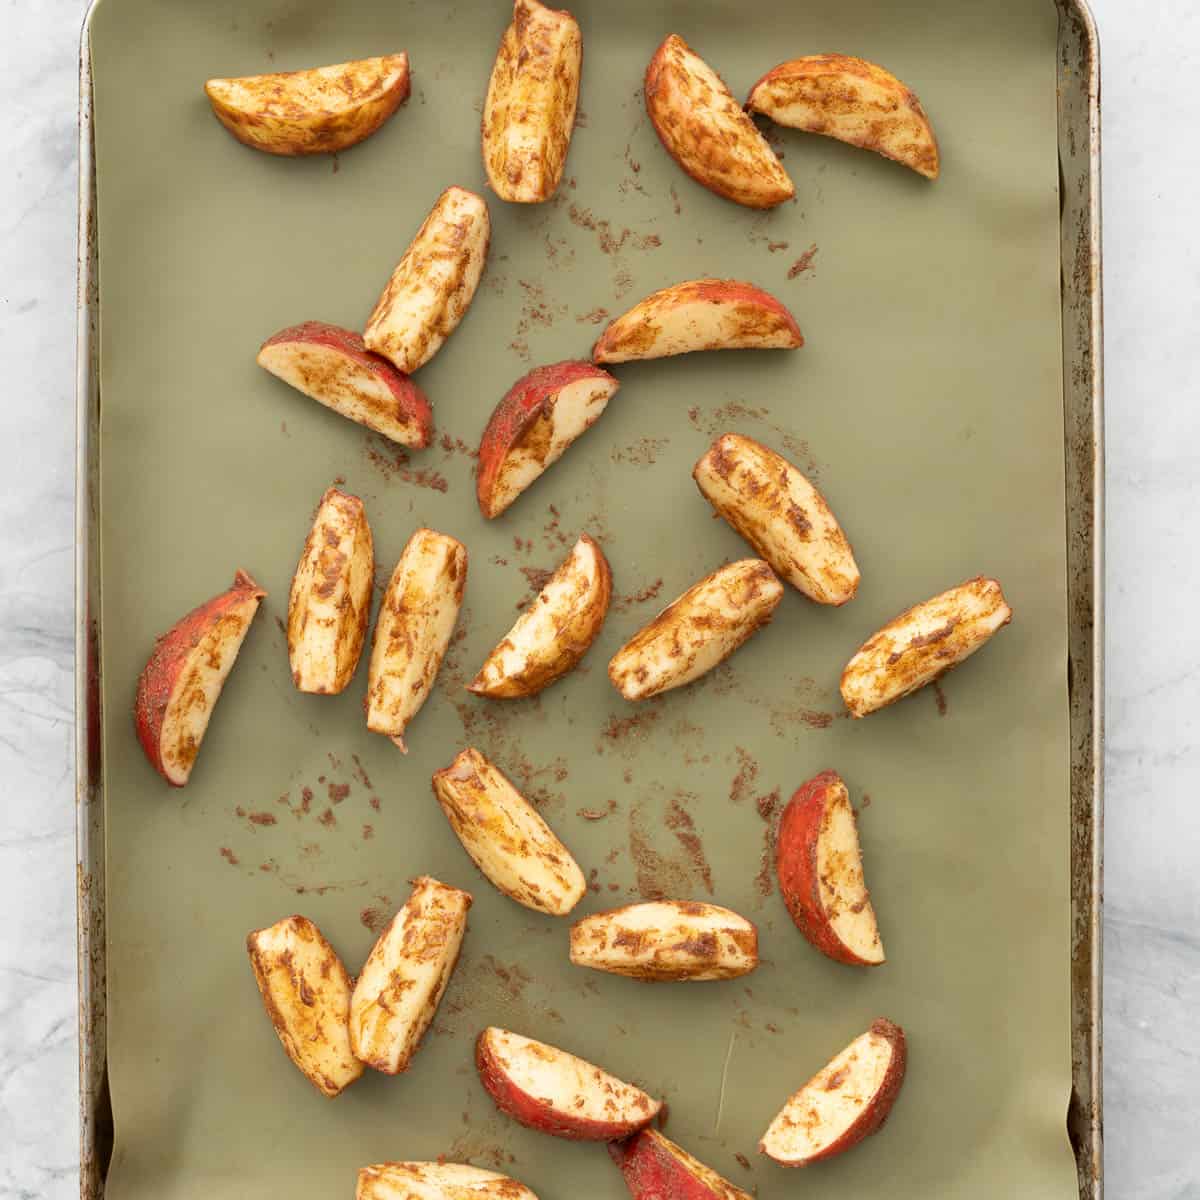 Cinnamon coated apple slices on a lined baking tray ready to go into the oven. 